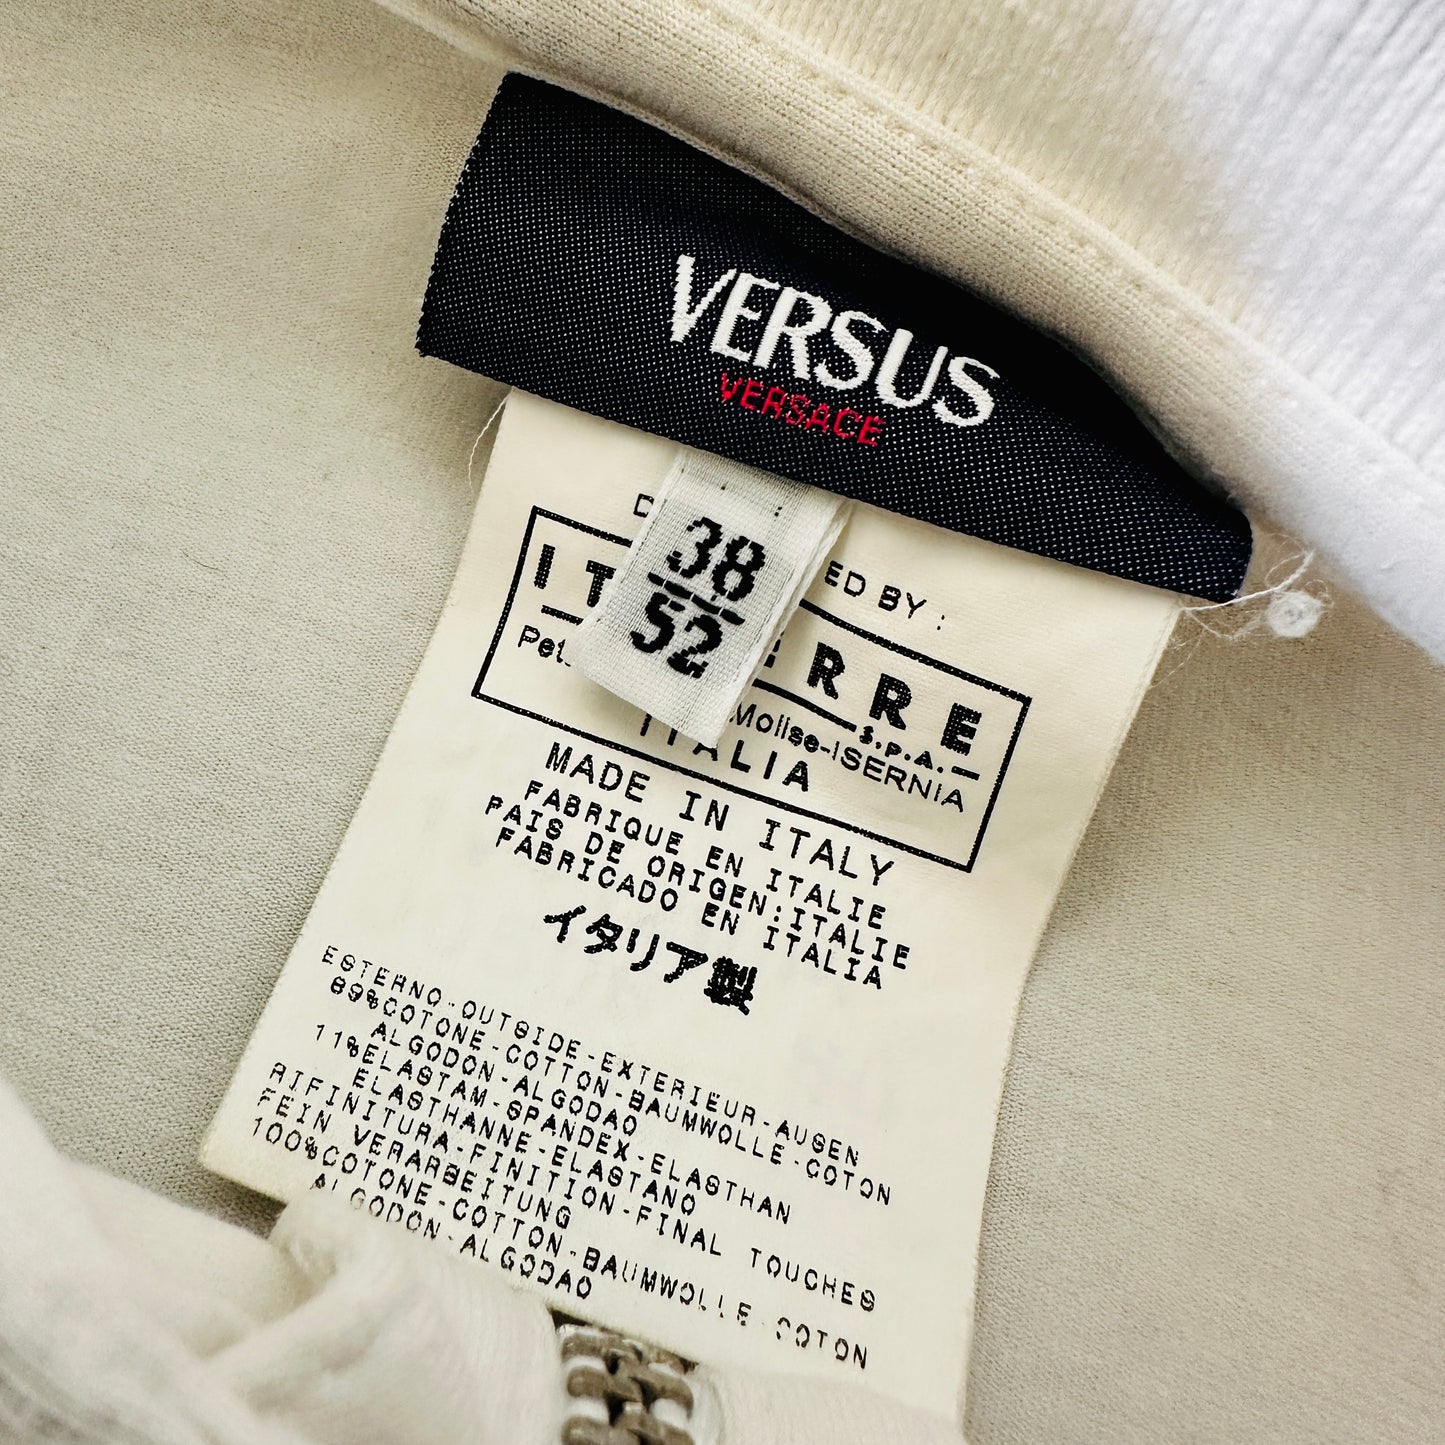 Versace Versus Polo Shirt - 52 / M - Made in Italy